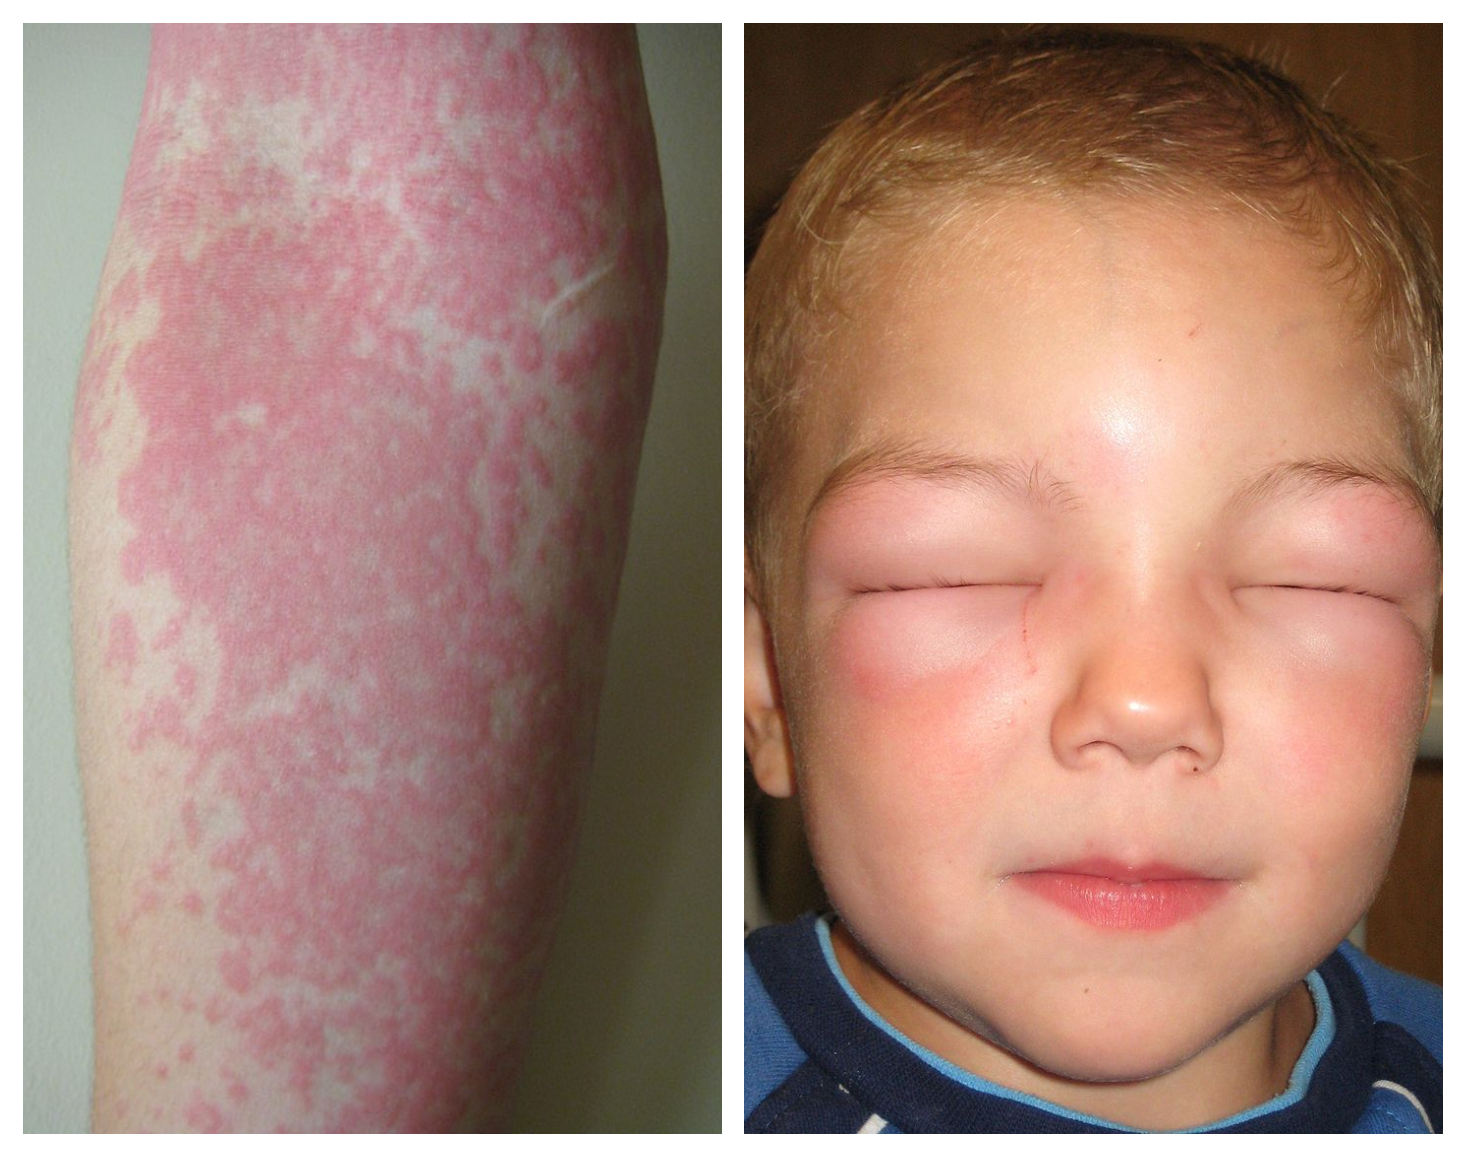 Hive rash (on the left) and a more serious rash, Anaphylaxis (on the right). Images from Wikipedia by John D